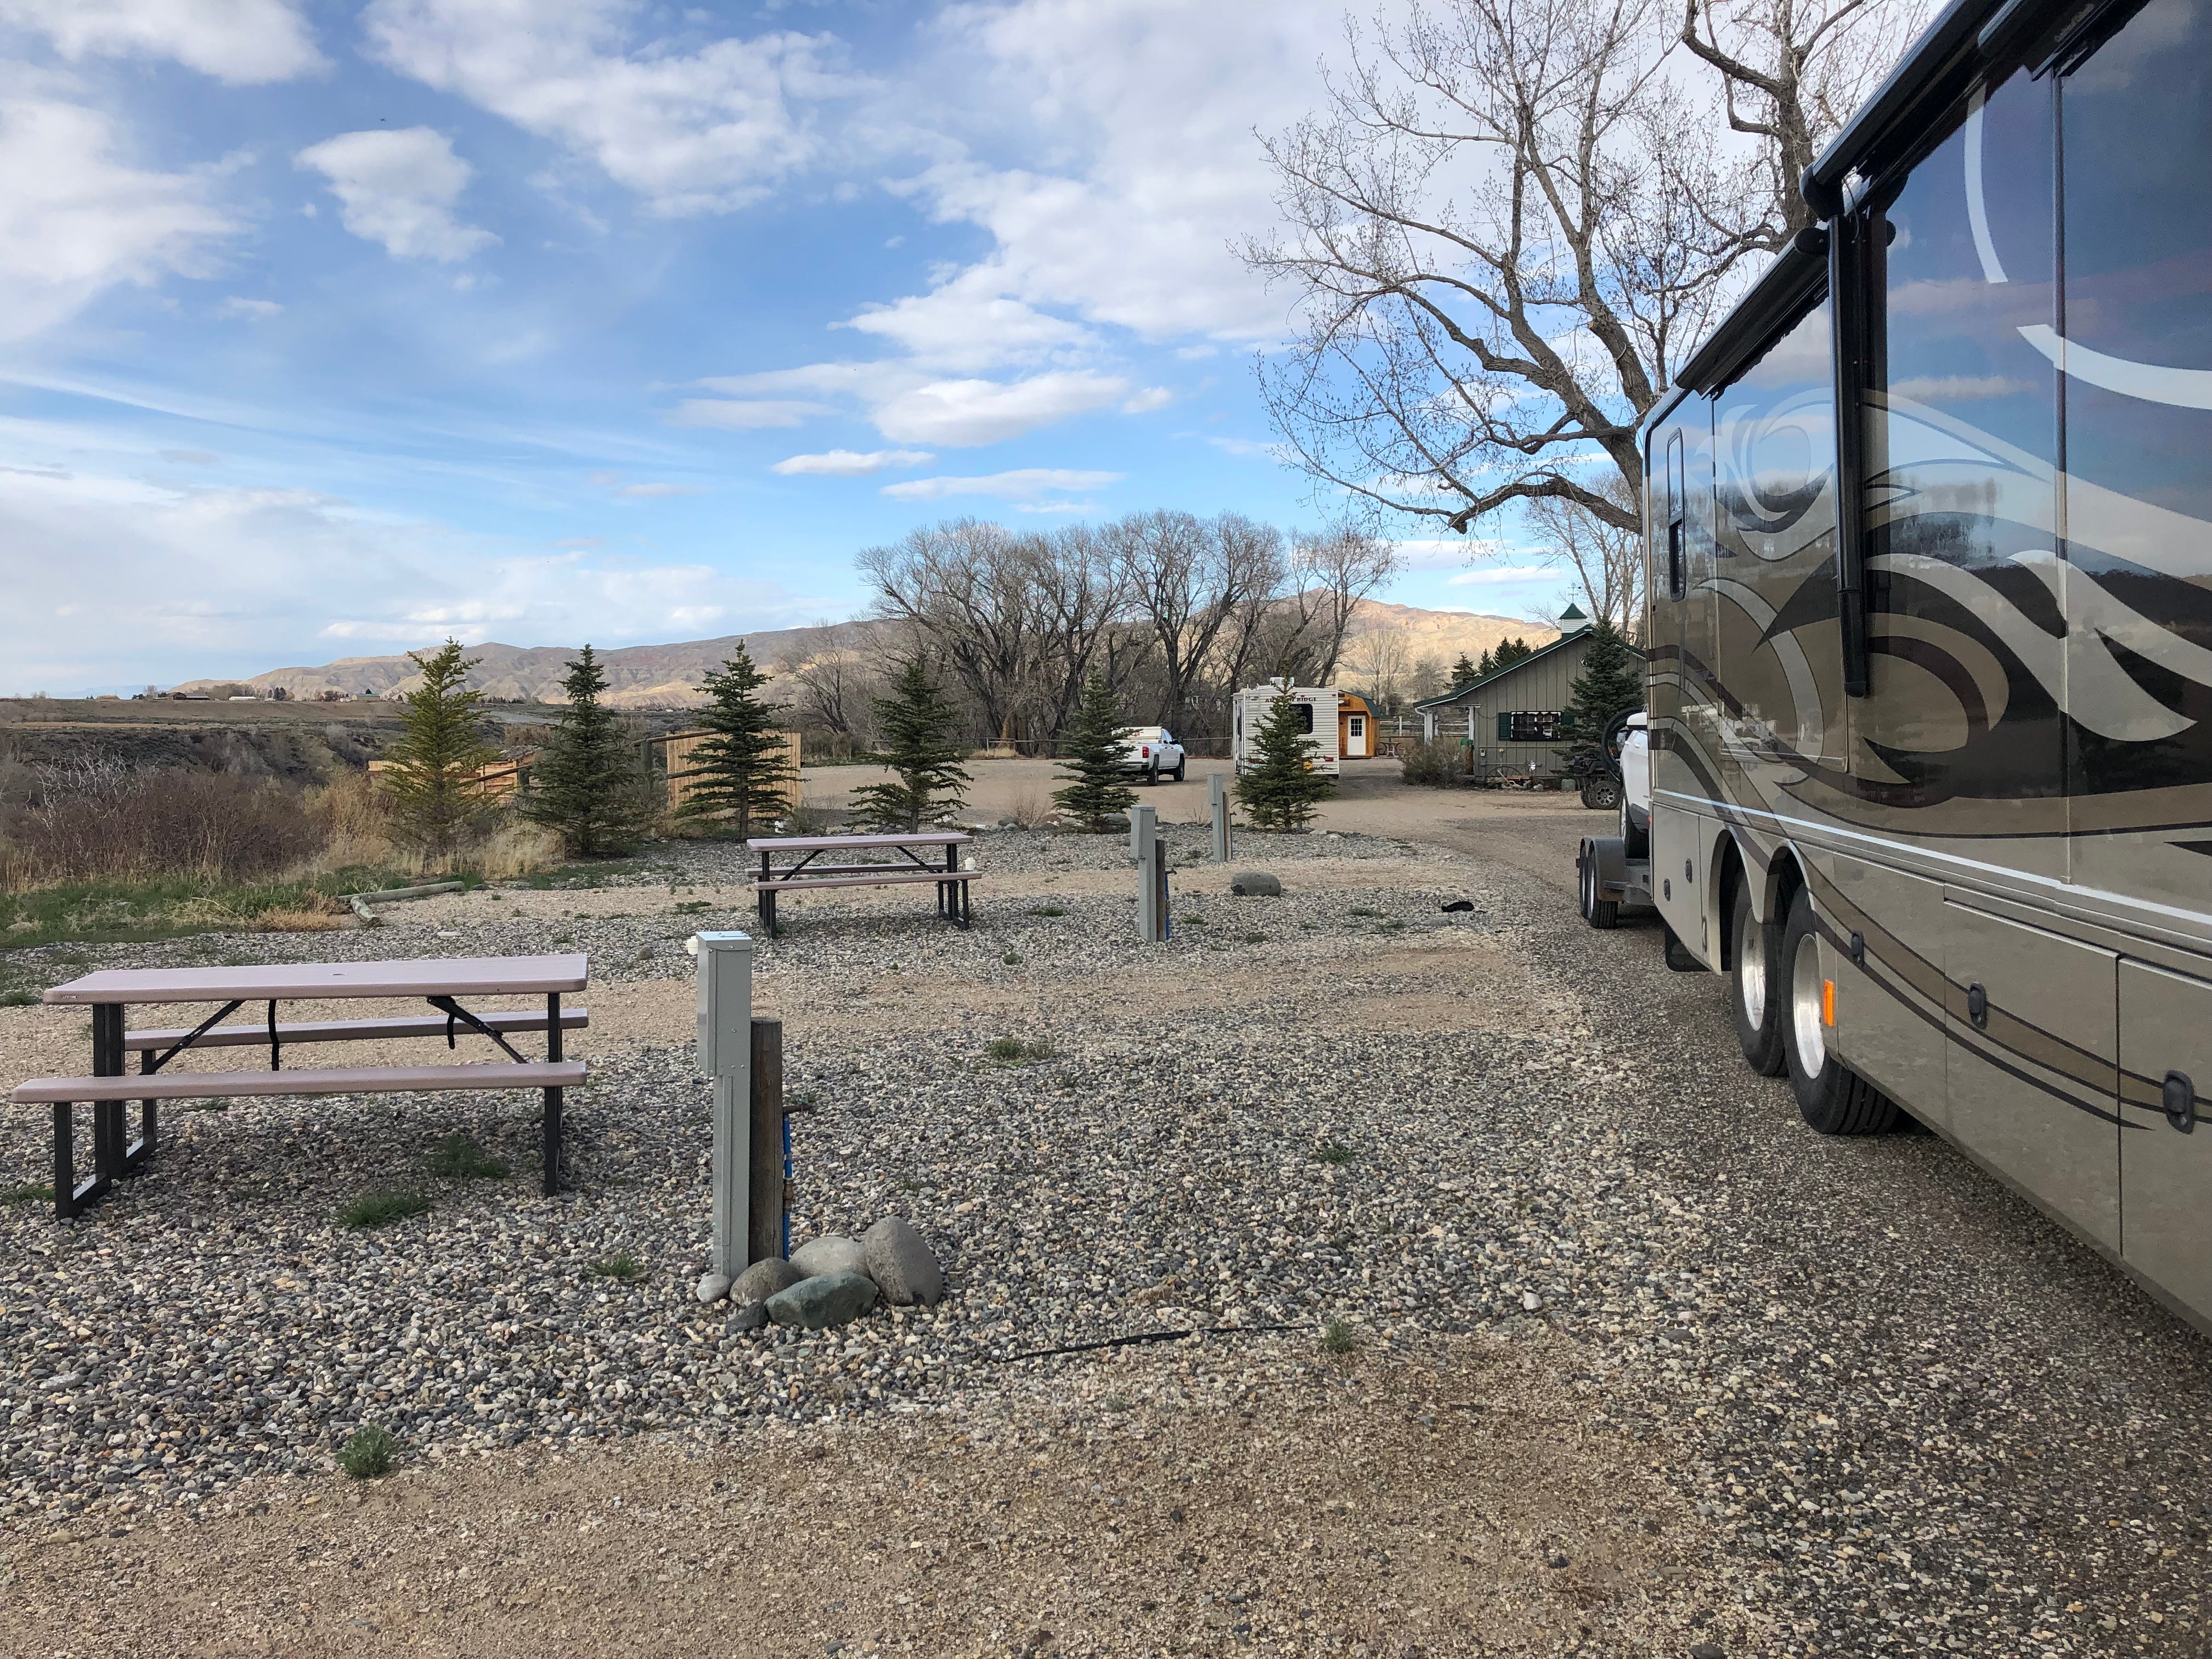 Camper submitted image from Cody Trout Ranch Camp - RV, Tipi, and Sheep Wagon Camping - 4